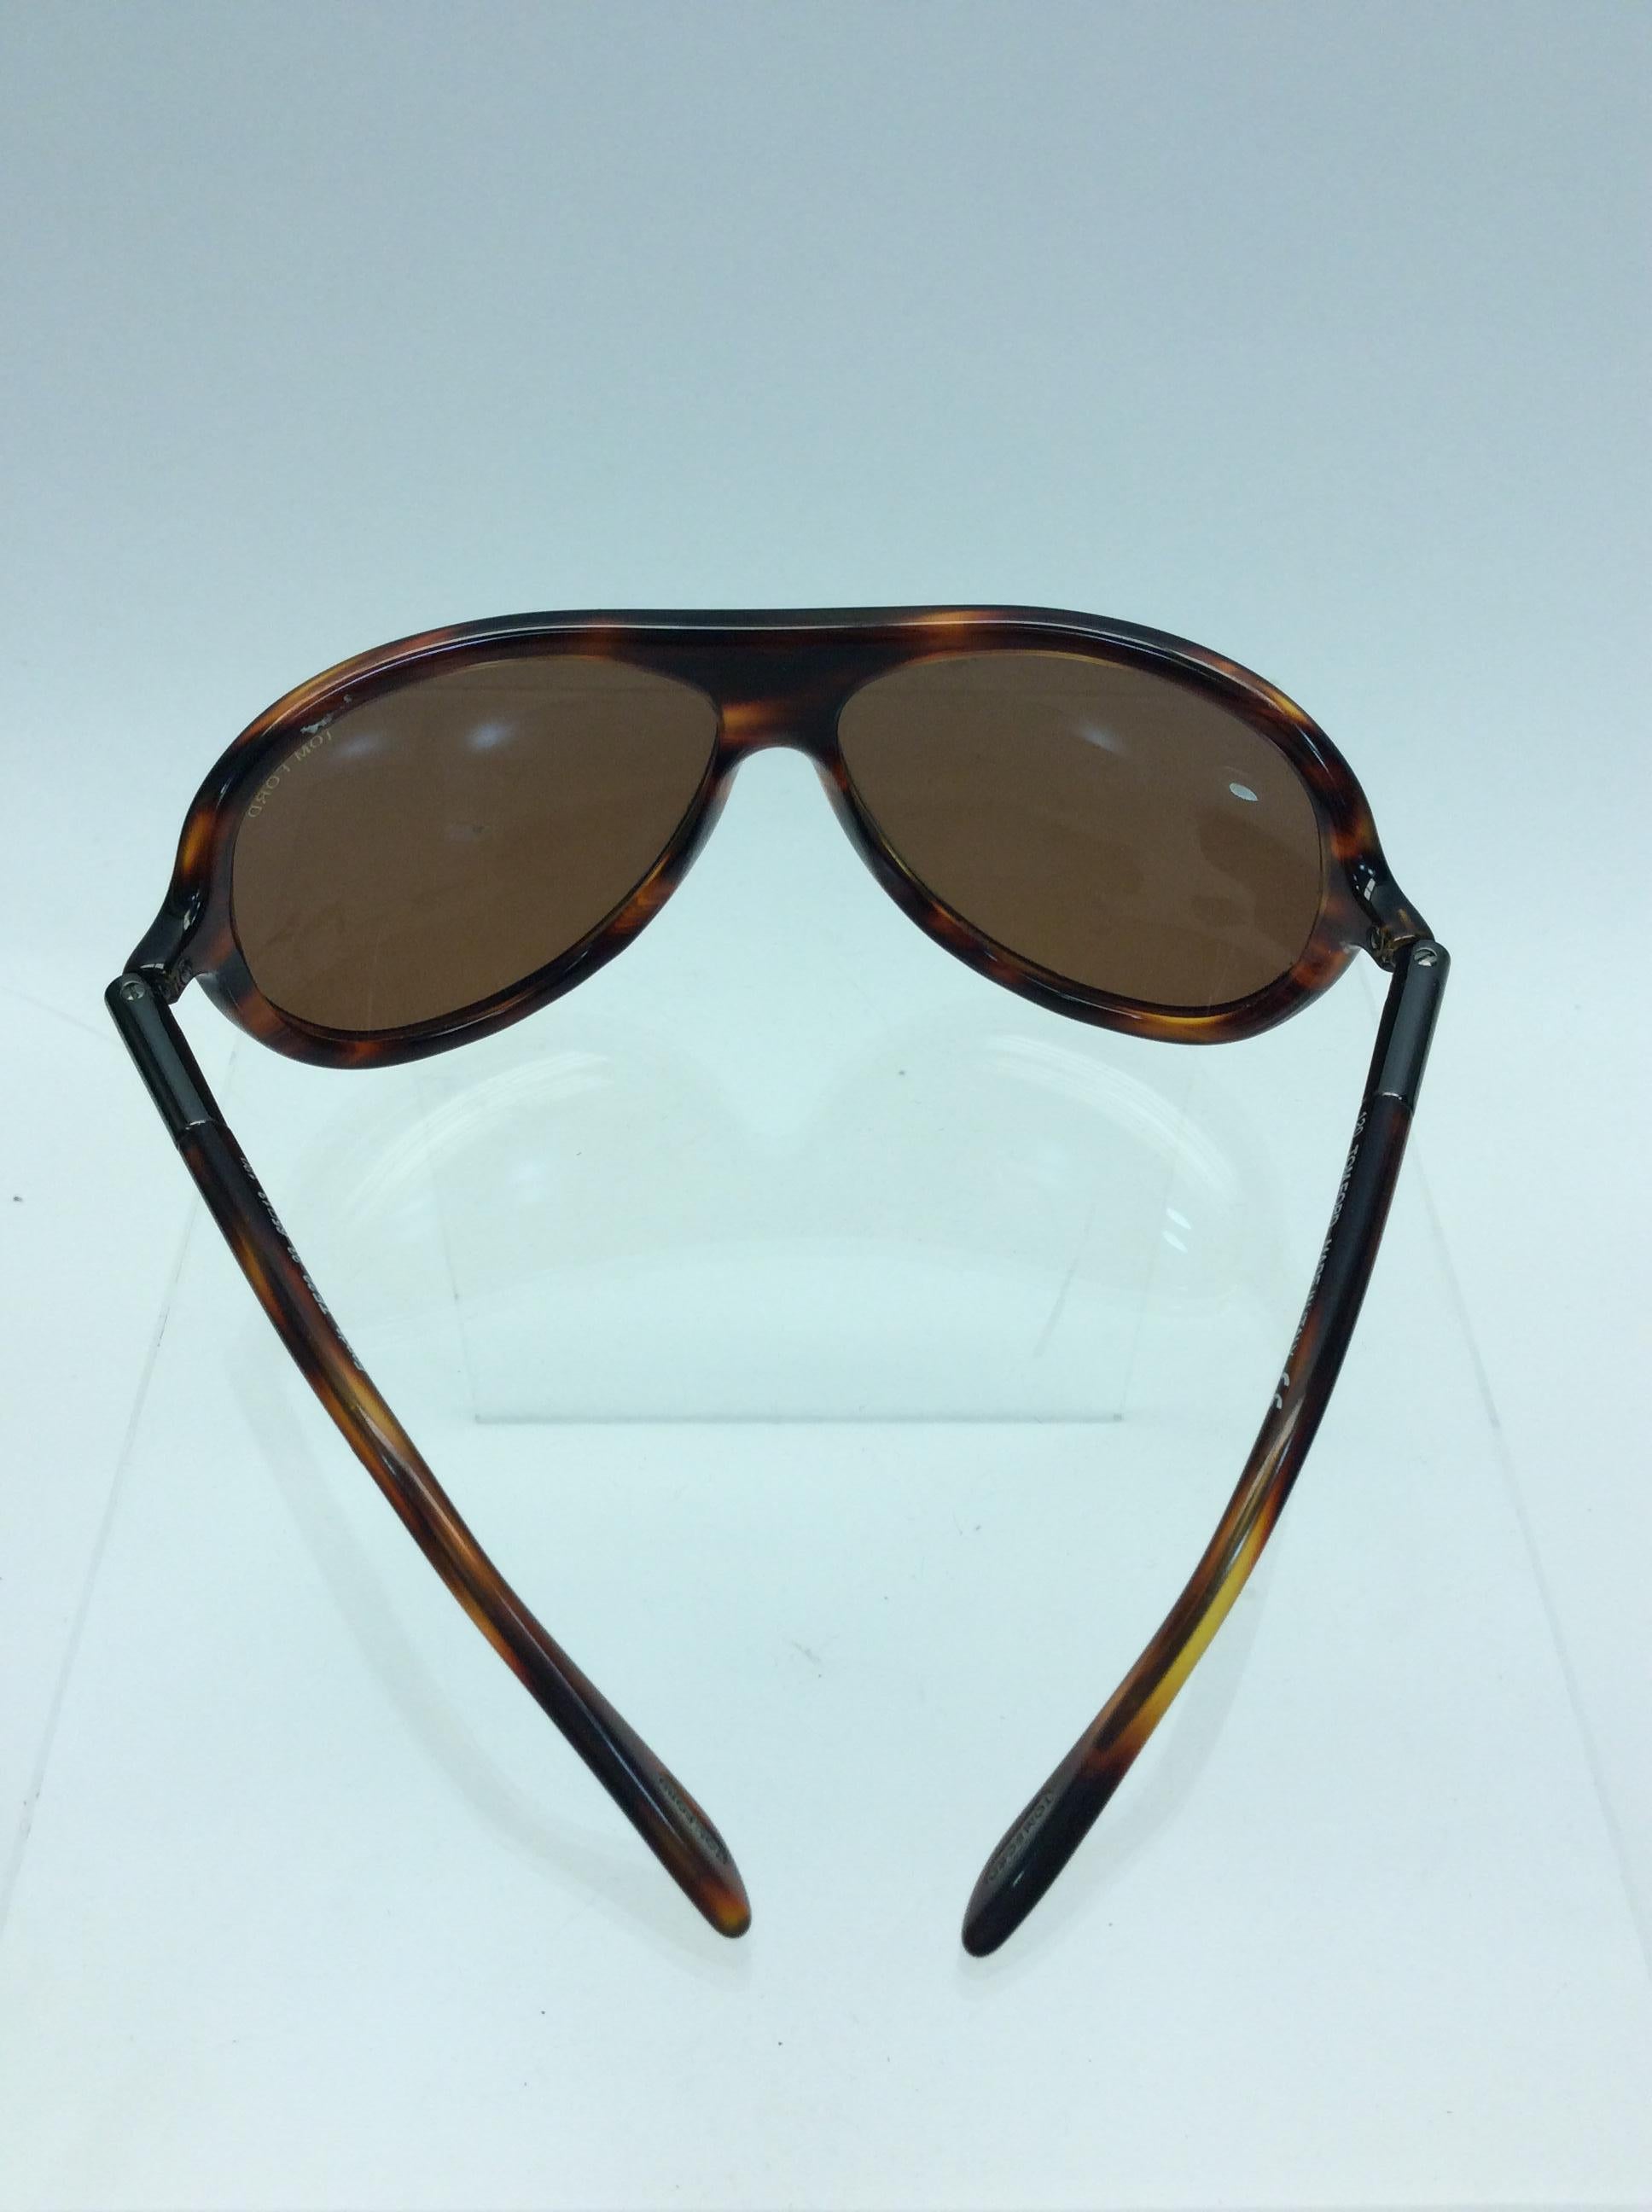 Tom Ford Tortoise Sunglasses In Good Condition For Sale In Narberth, PA